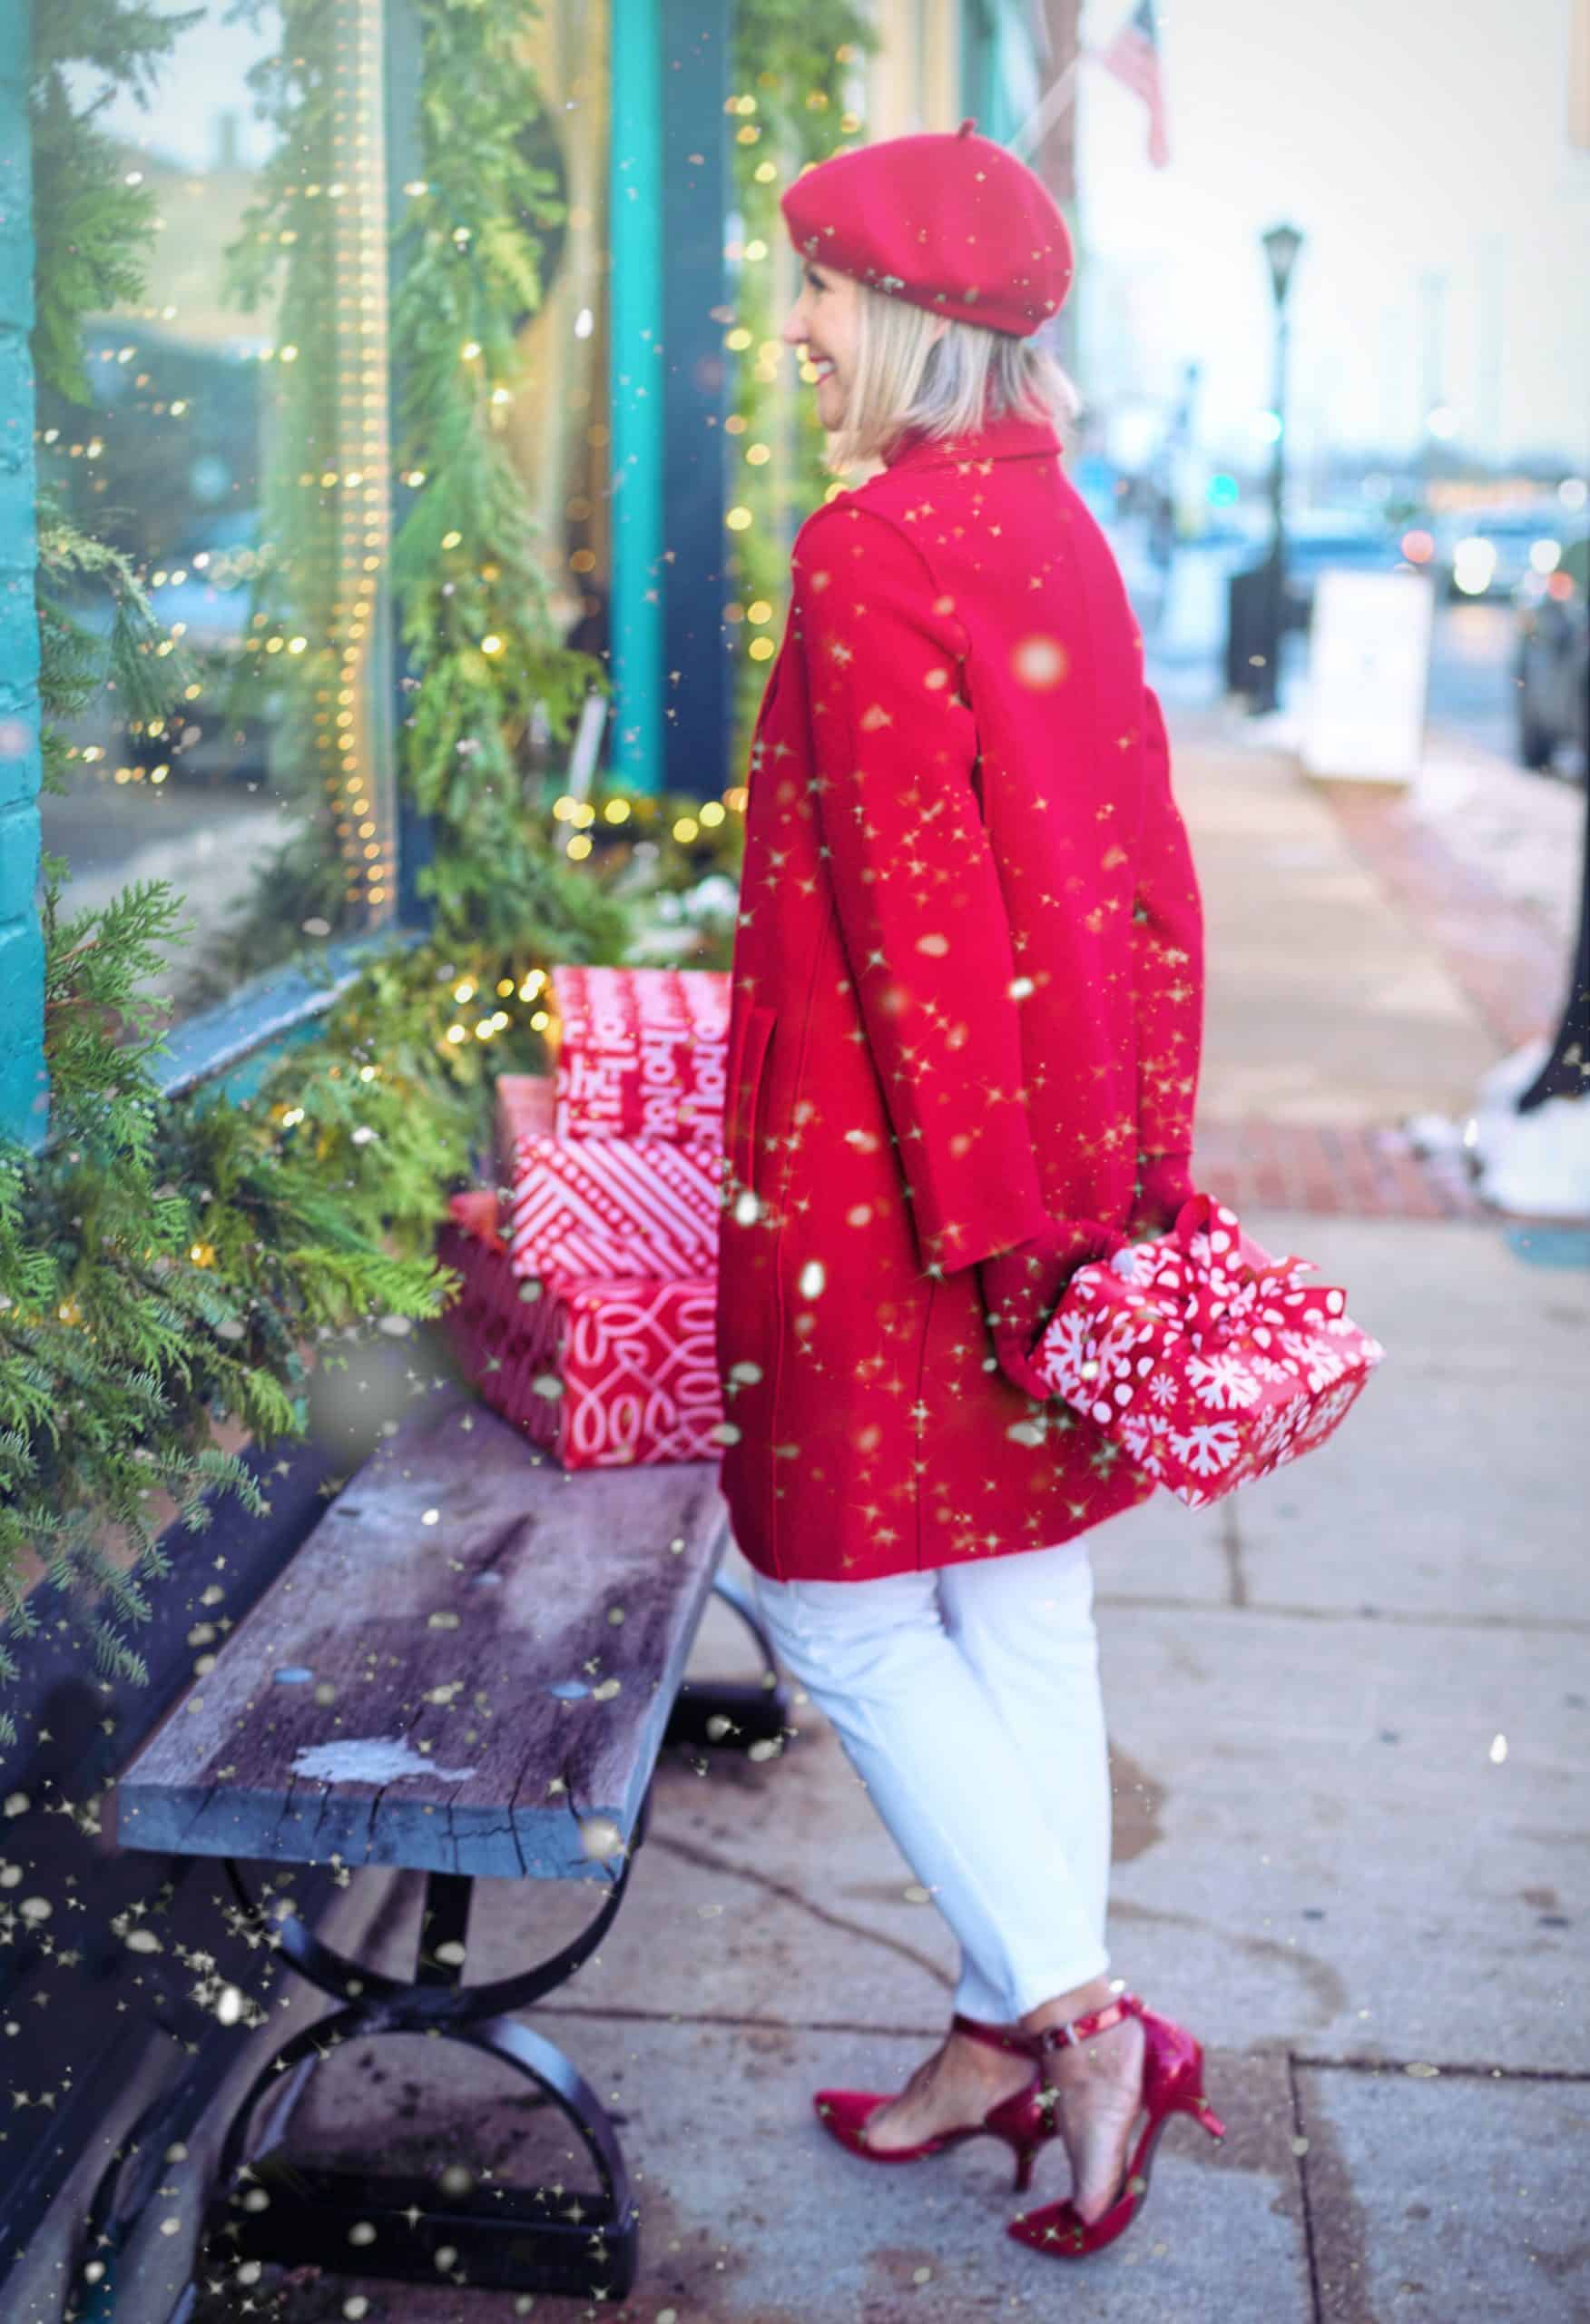 Women outside a store during winter wearing a red coat.